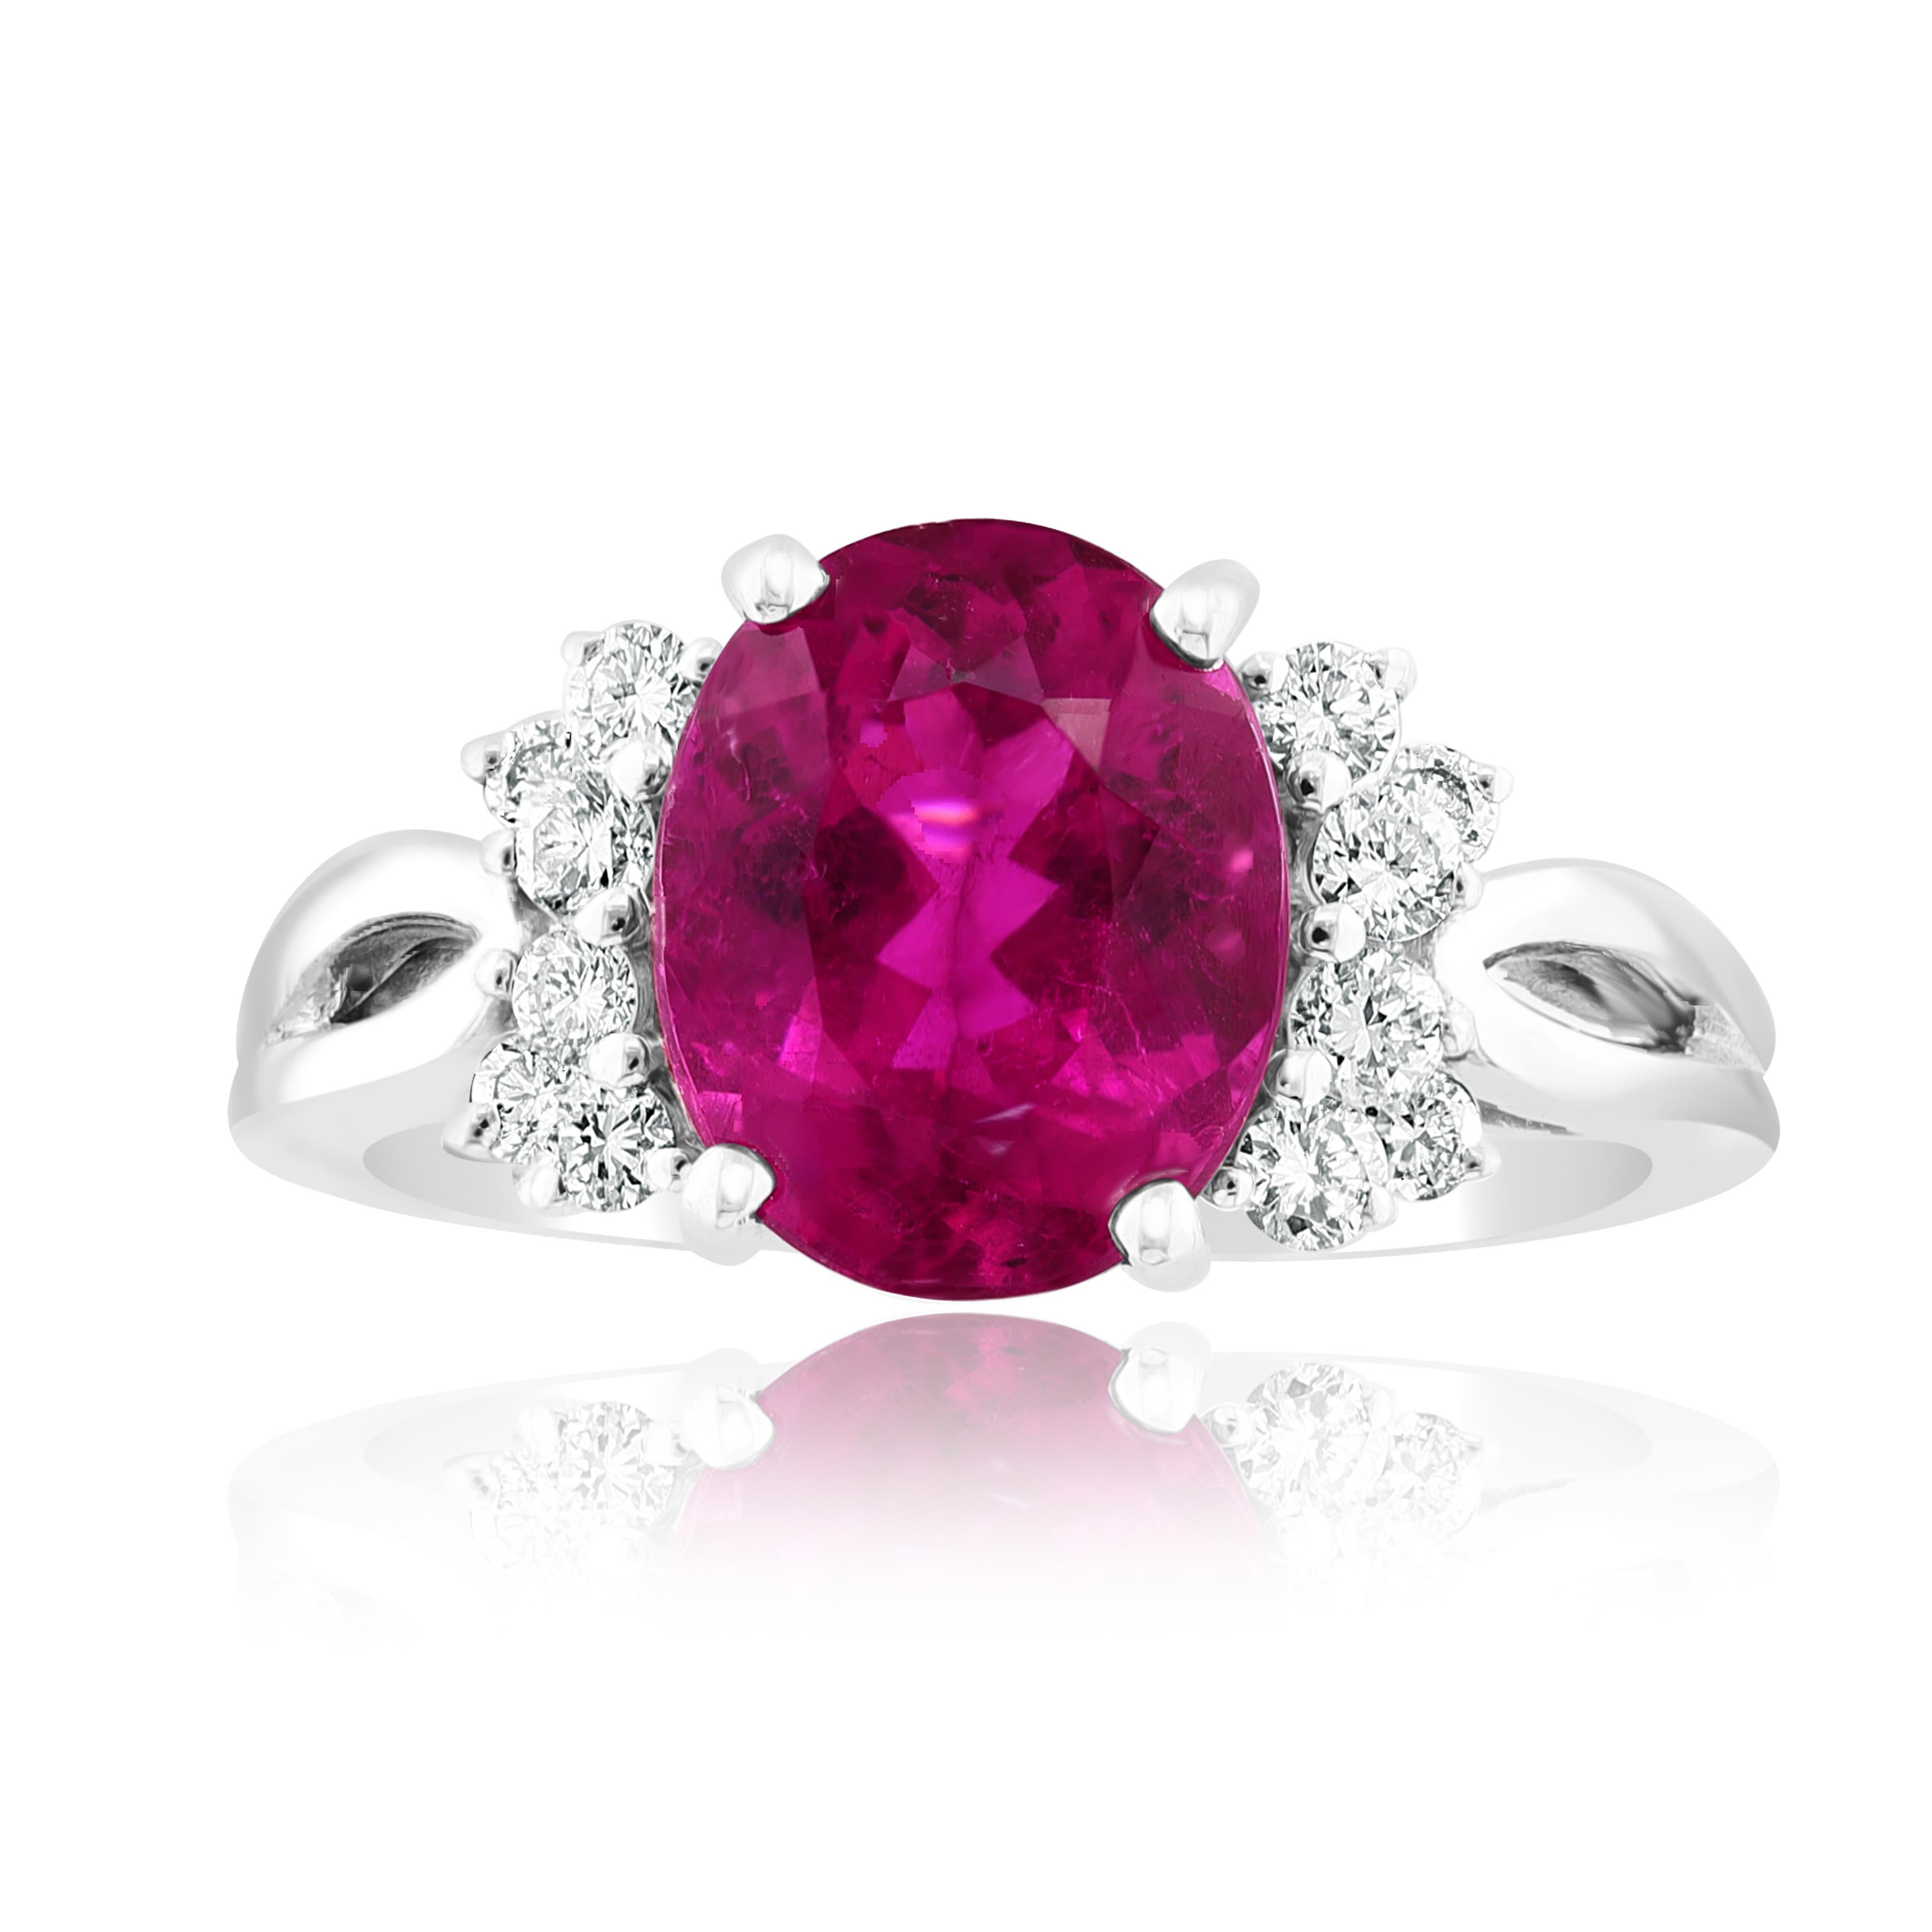 This classic ring with Oval Cut Pink Tourmaline in the center is 2.80 carat with brilliant cut diamonds on both sides. 12 round diamonds and 4 baguette diamonds weigh 0.18 carat and are made of 18K White Gold.